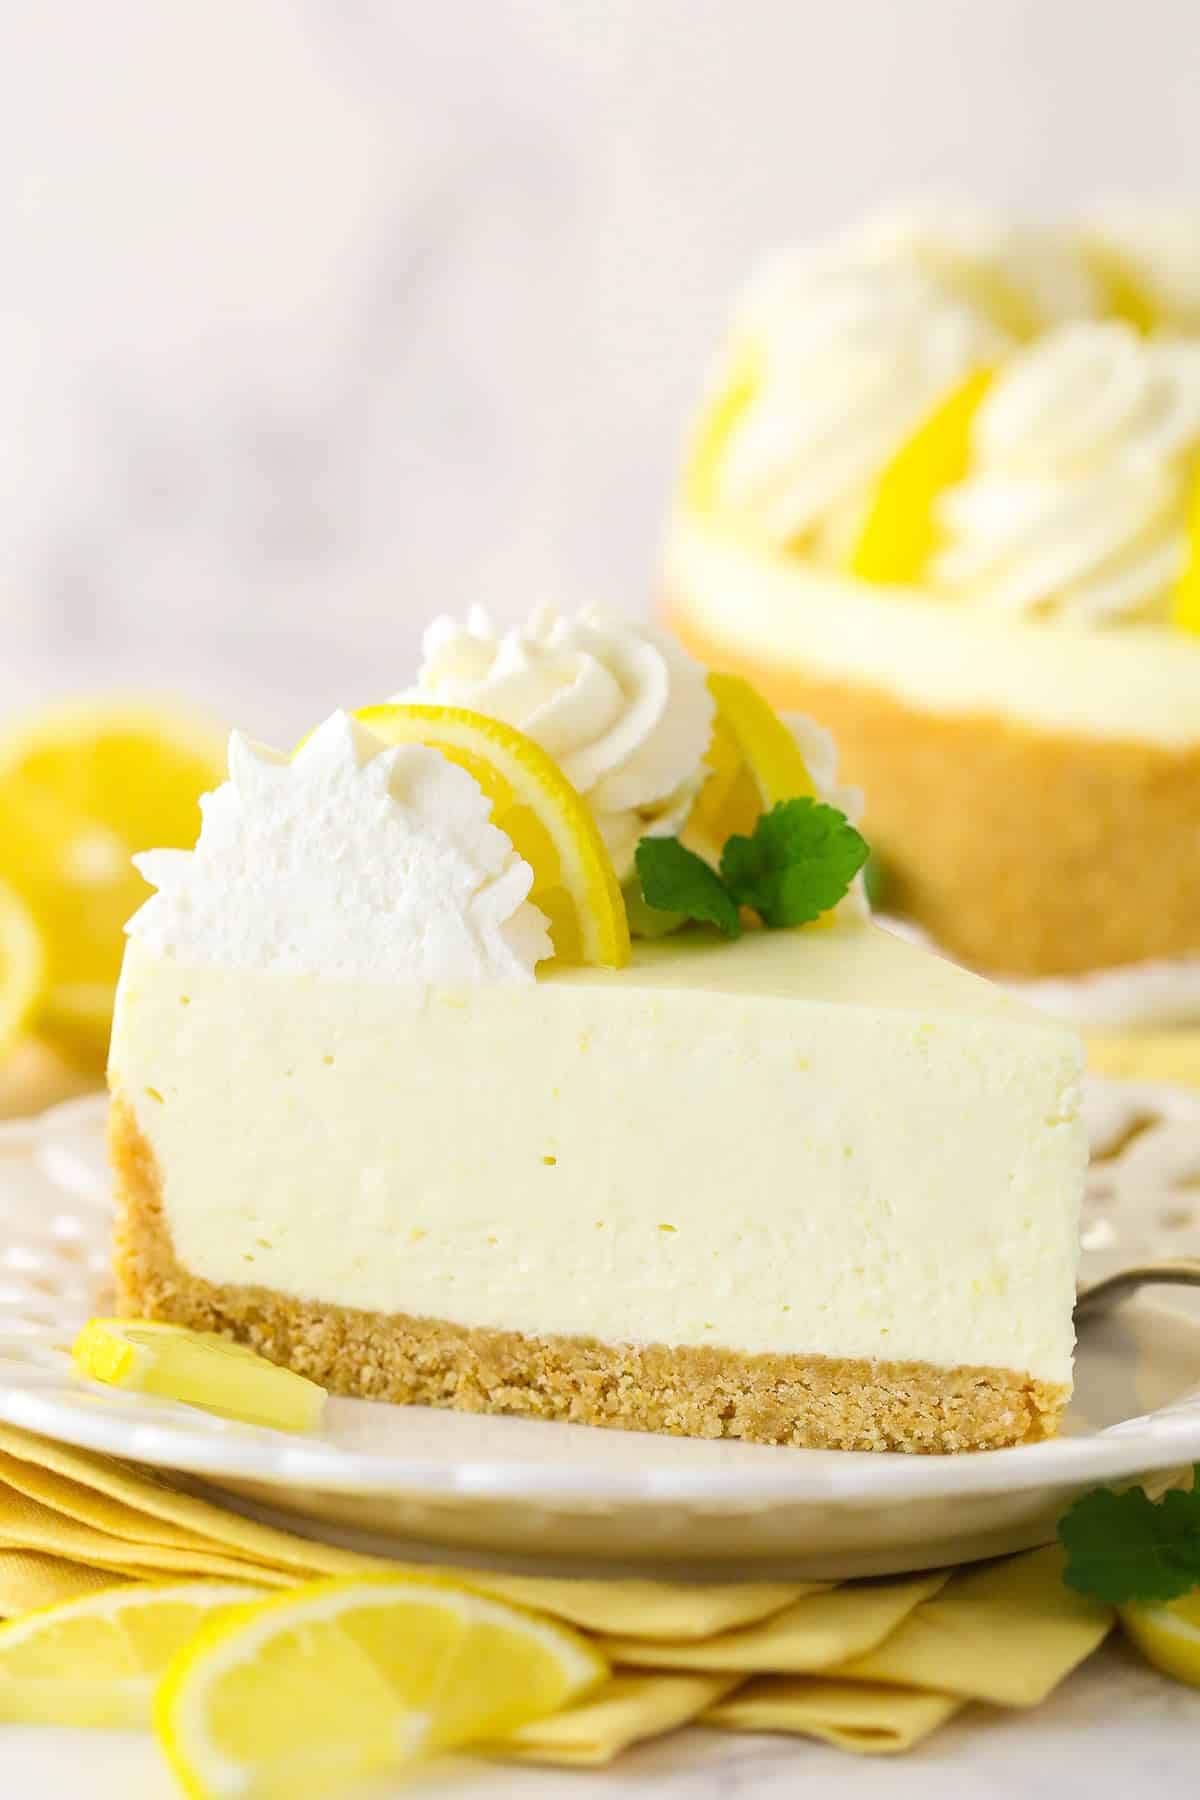 Side view of a slice of no bake lemon cheesecake on a plate.